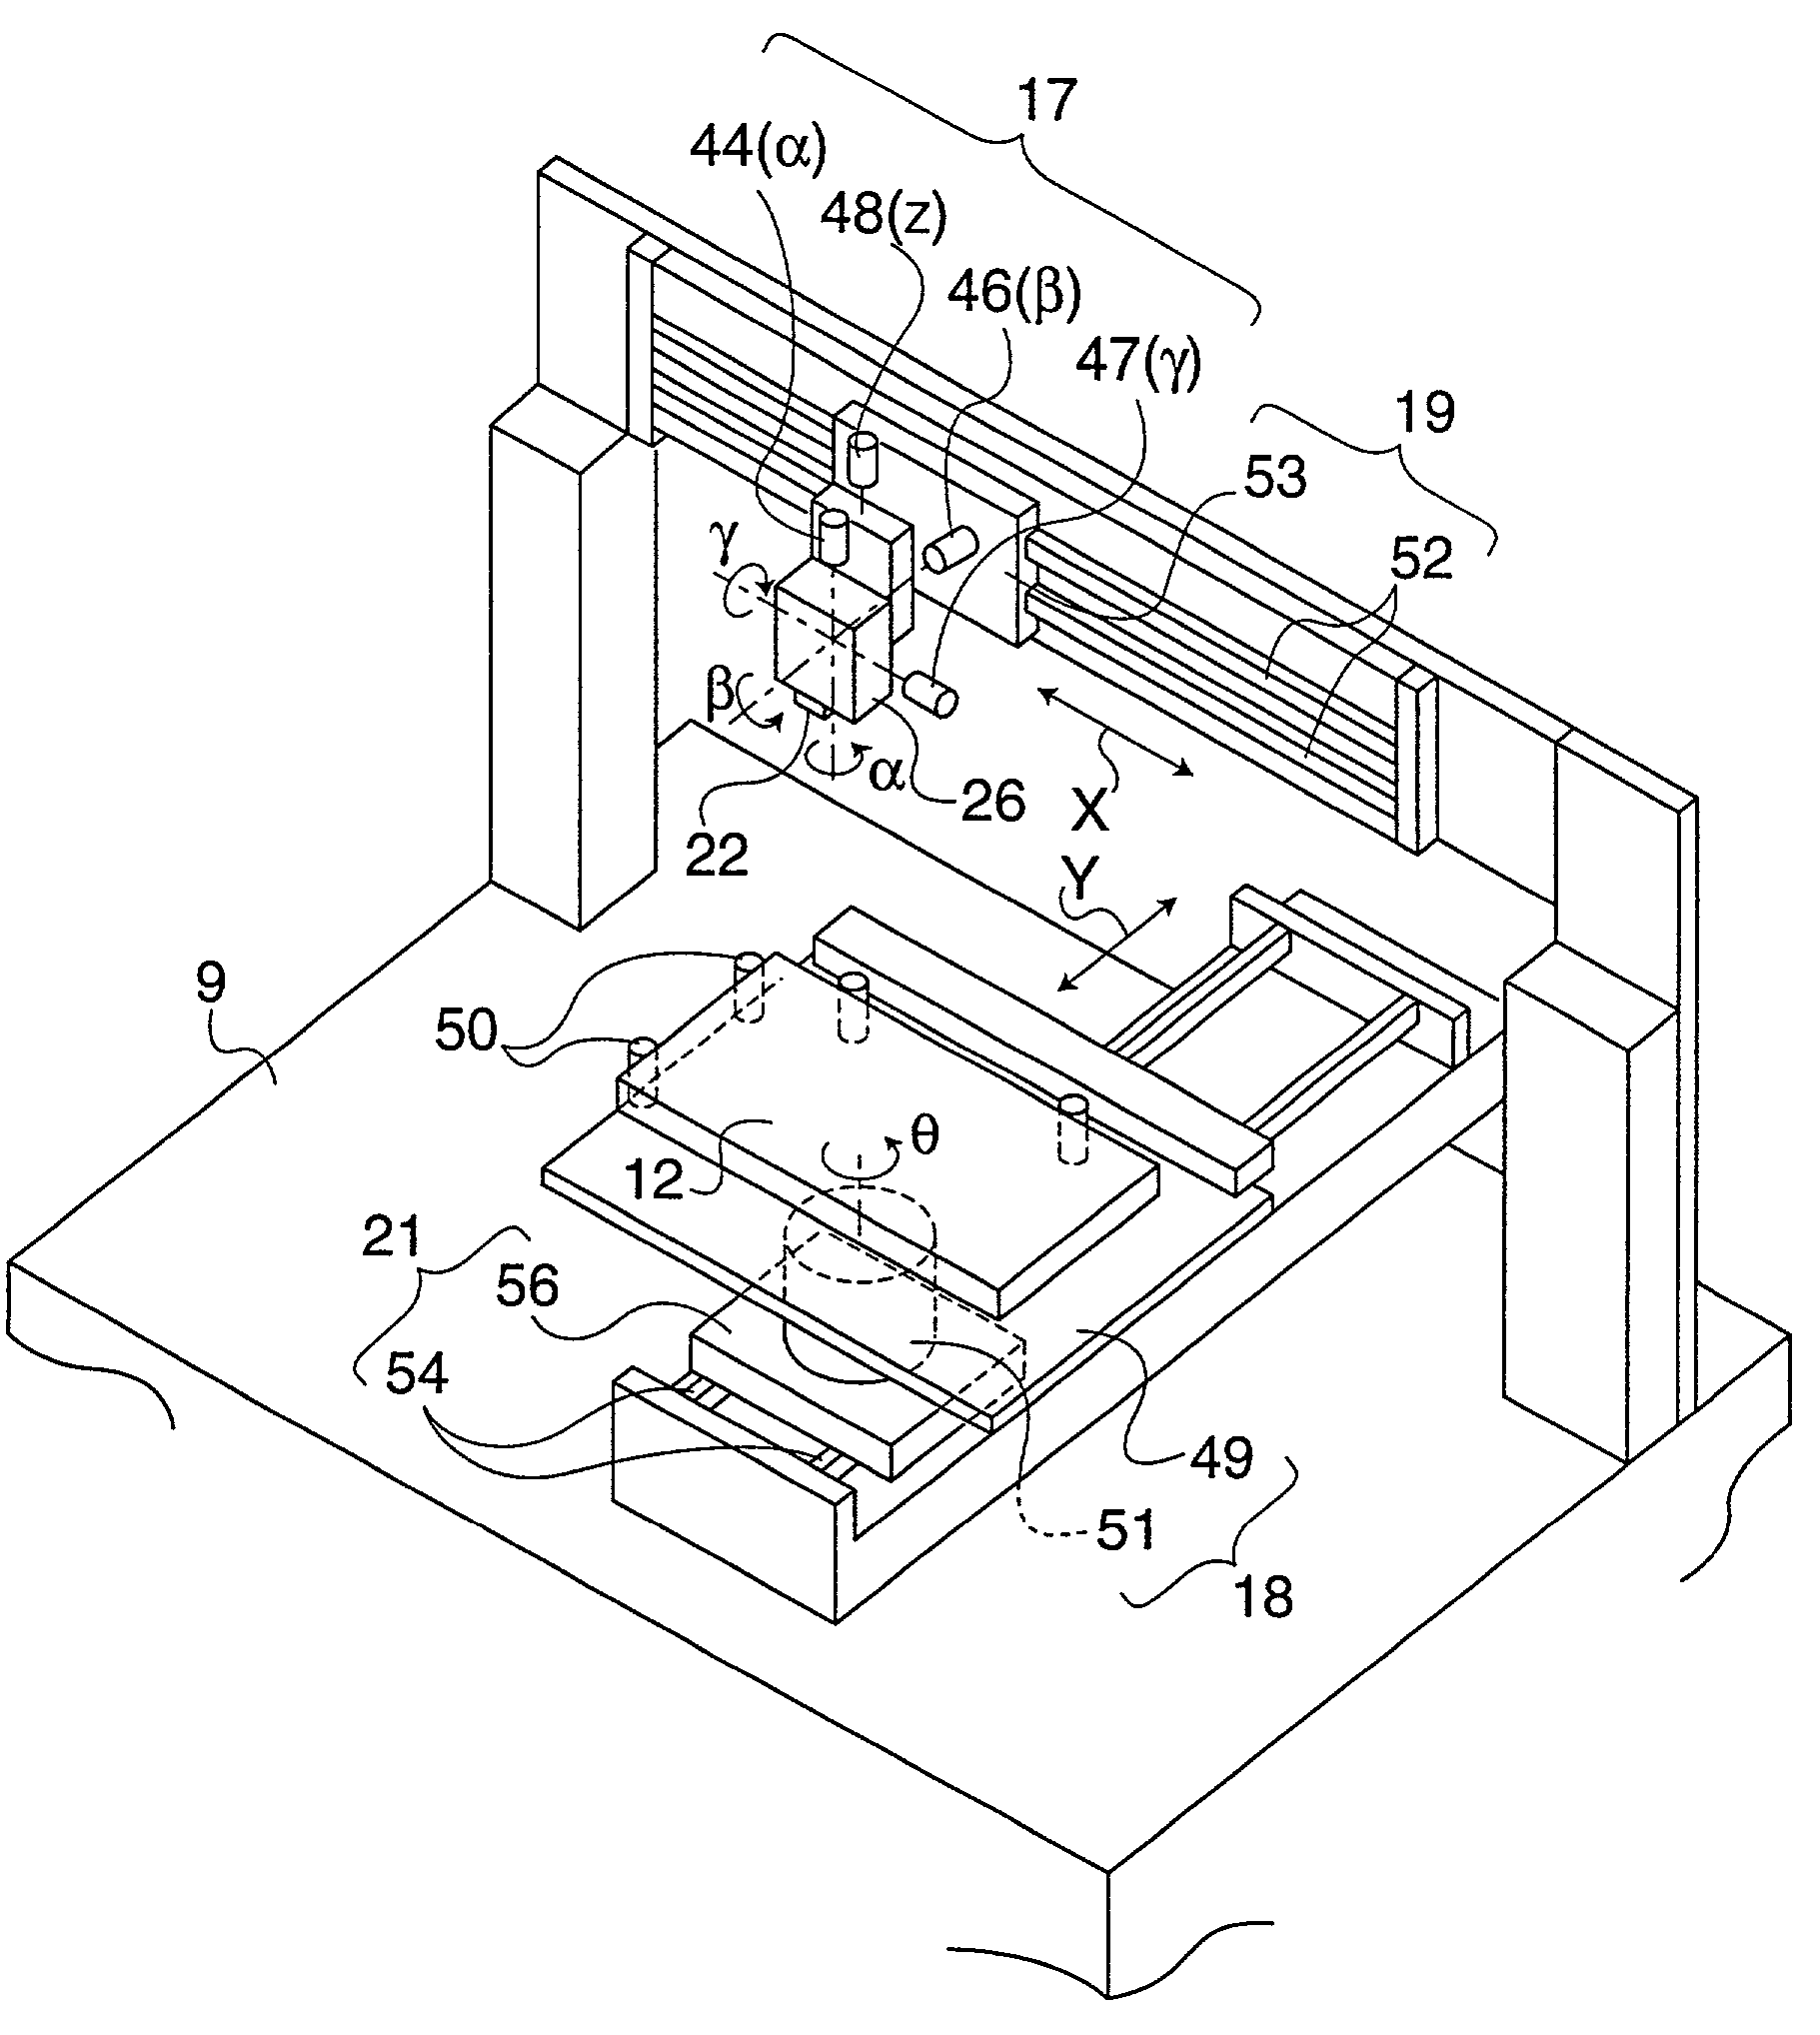 Apparatus and method for producing color filters by discharging material